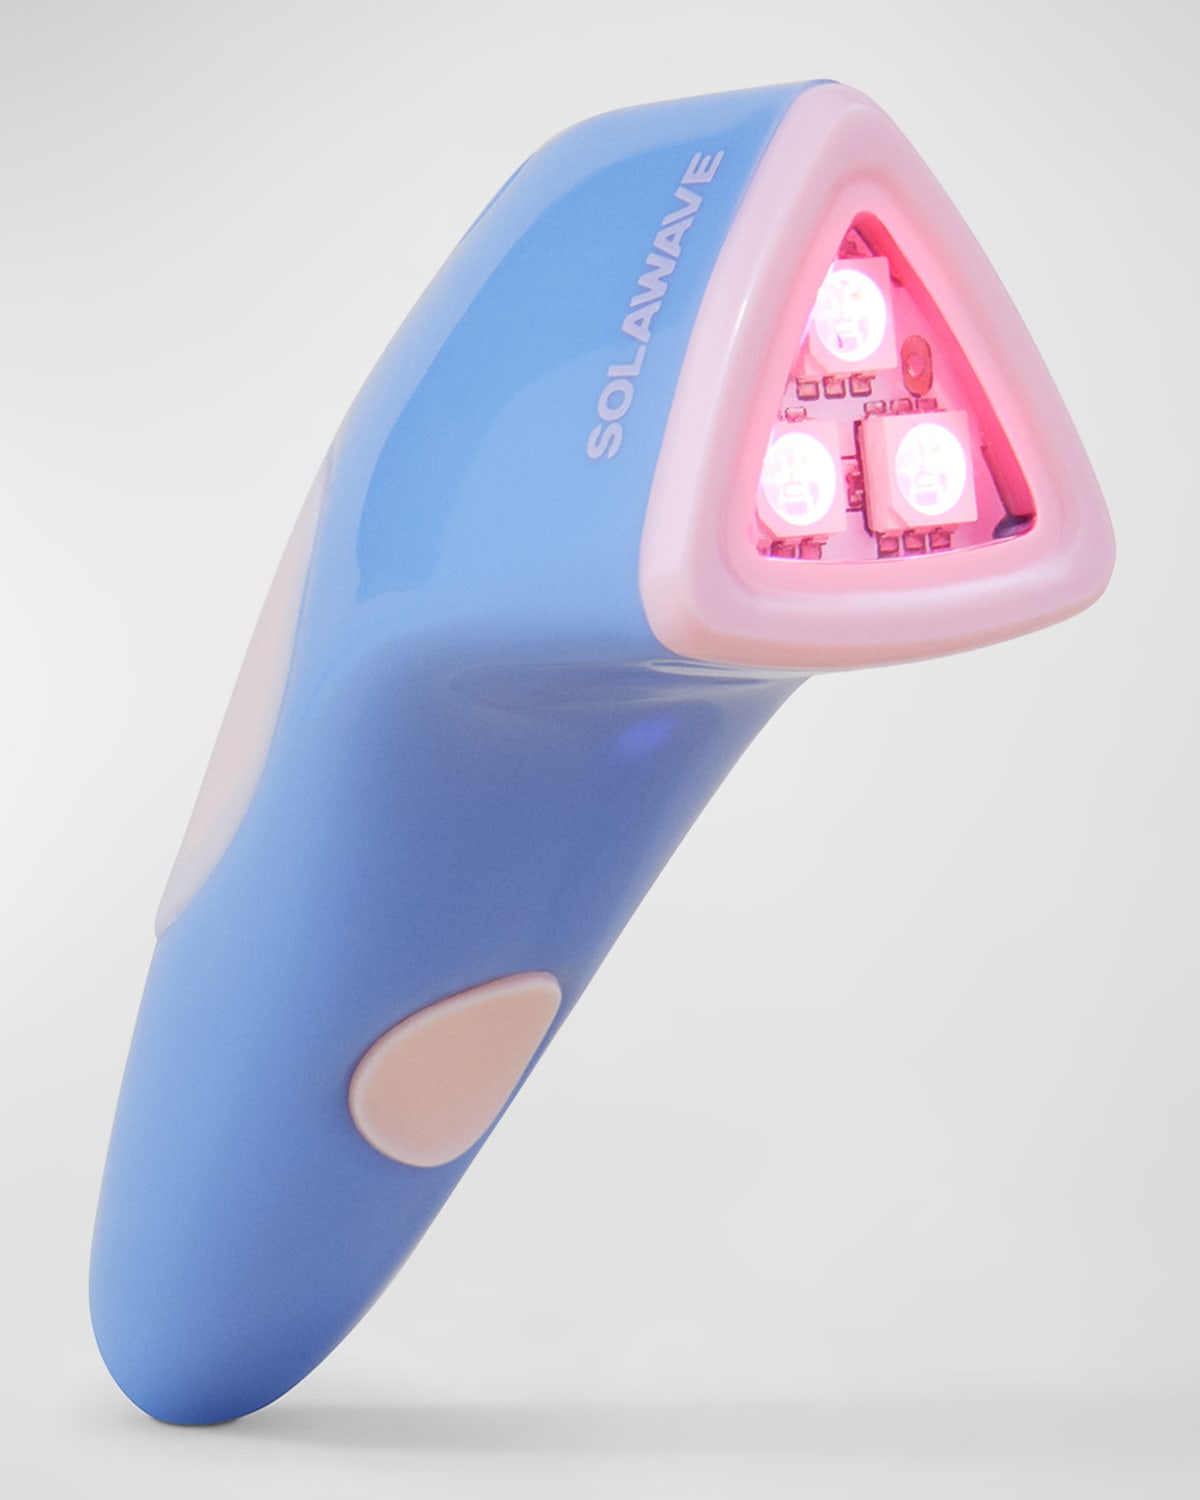 Bye Acne: 3 Minute Light Therapy Spot Treatment